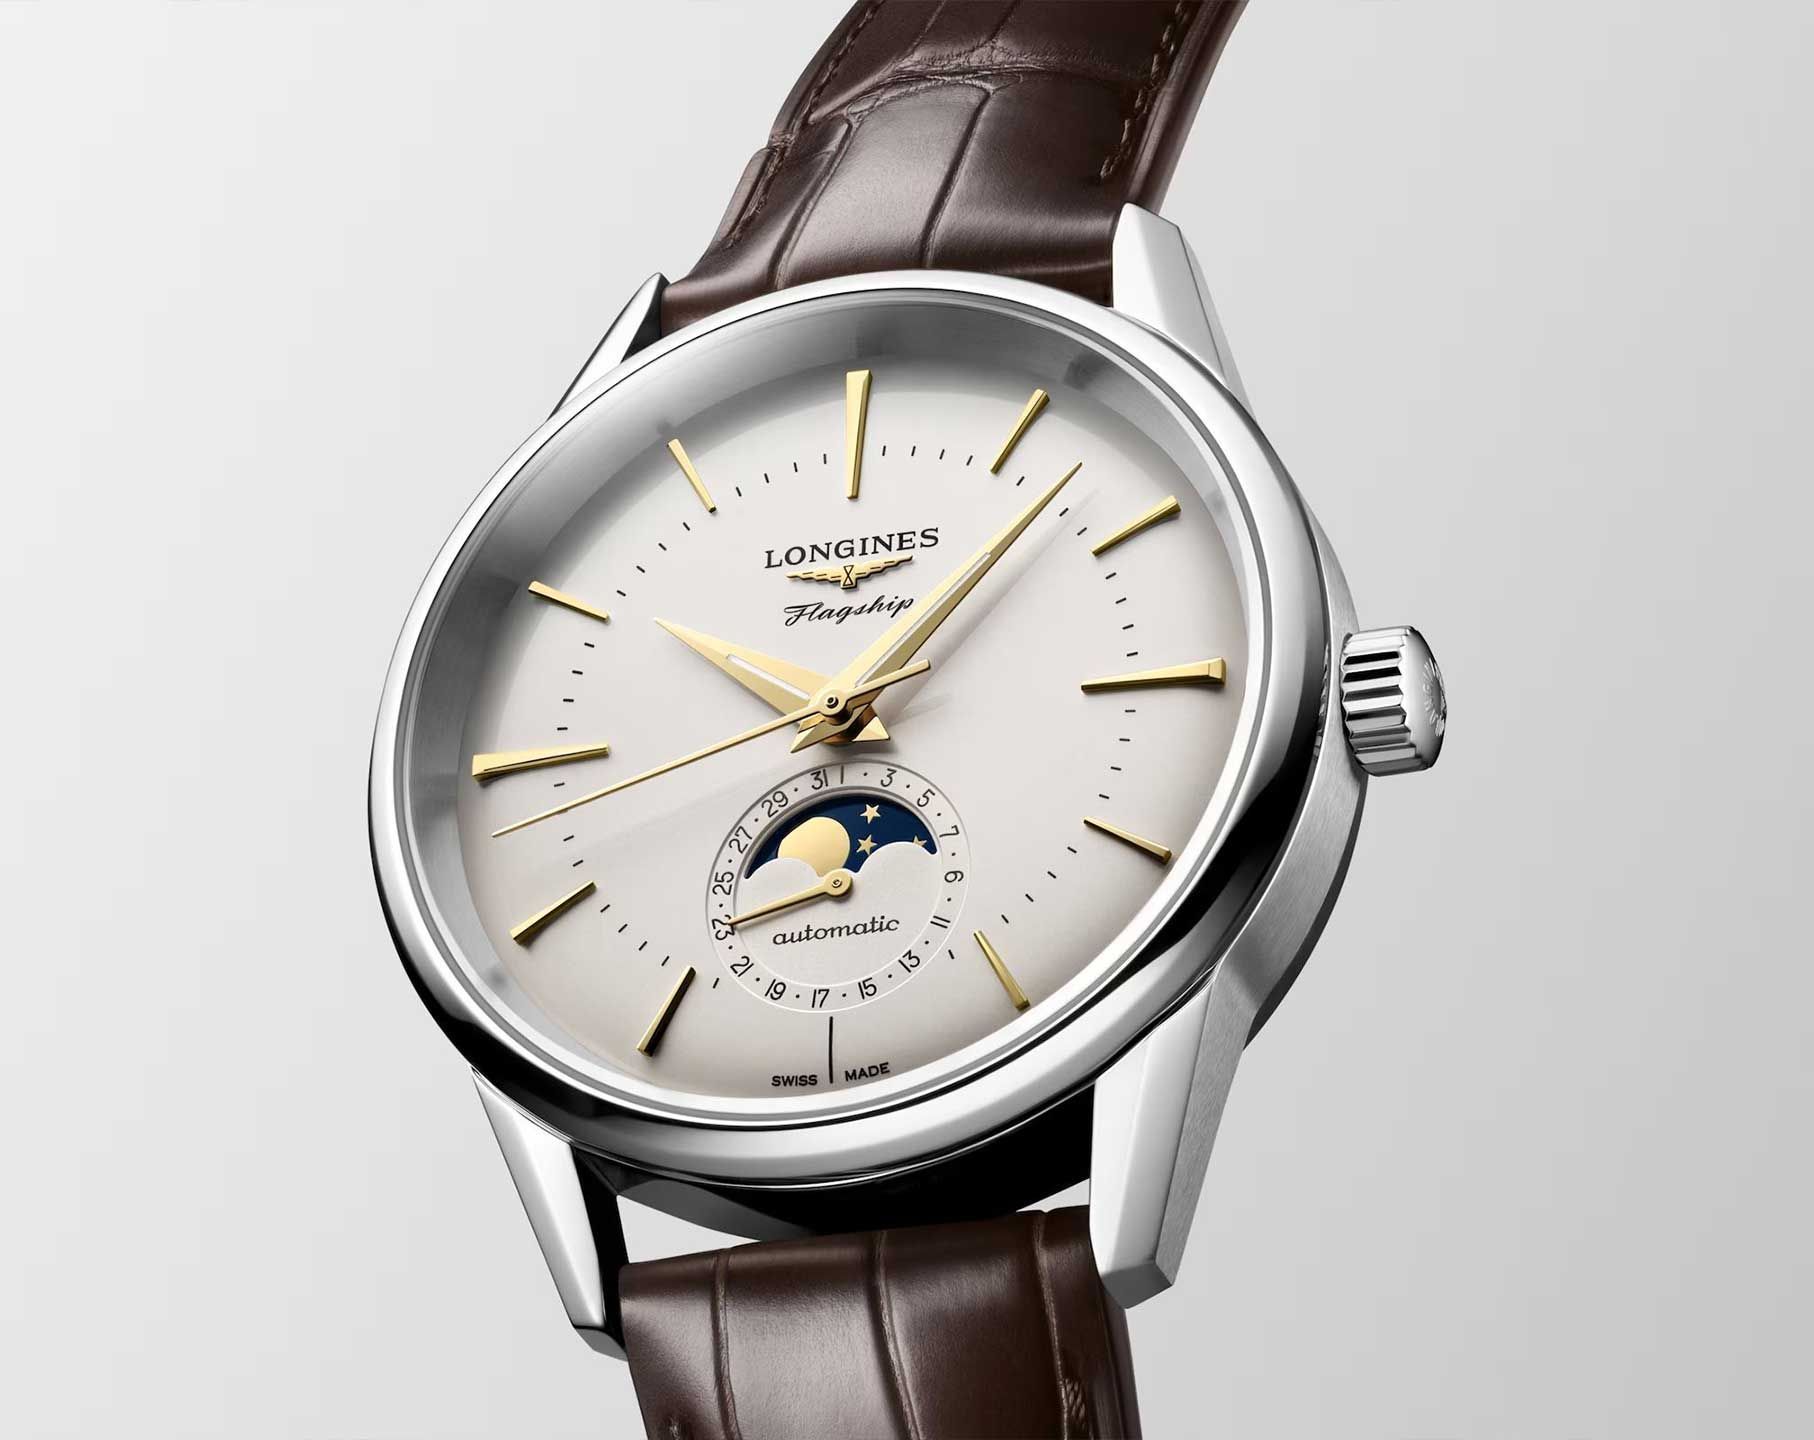 Longines Flagship 38.5 mm Watch in Silver Dial